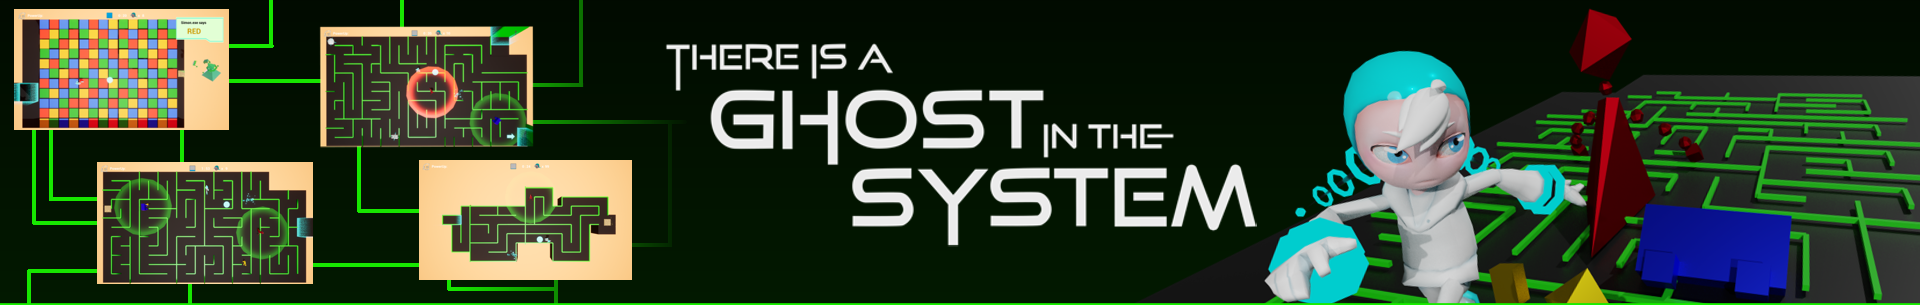 There is a Ghost in the System